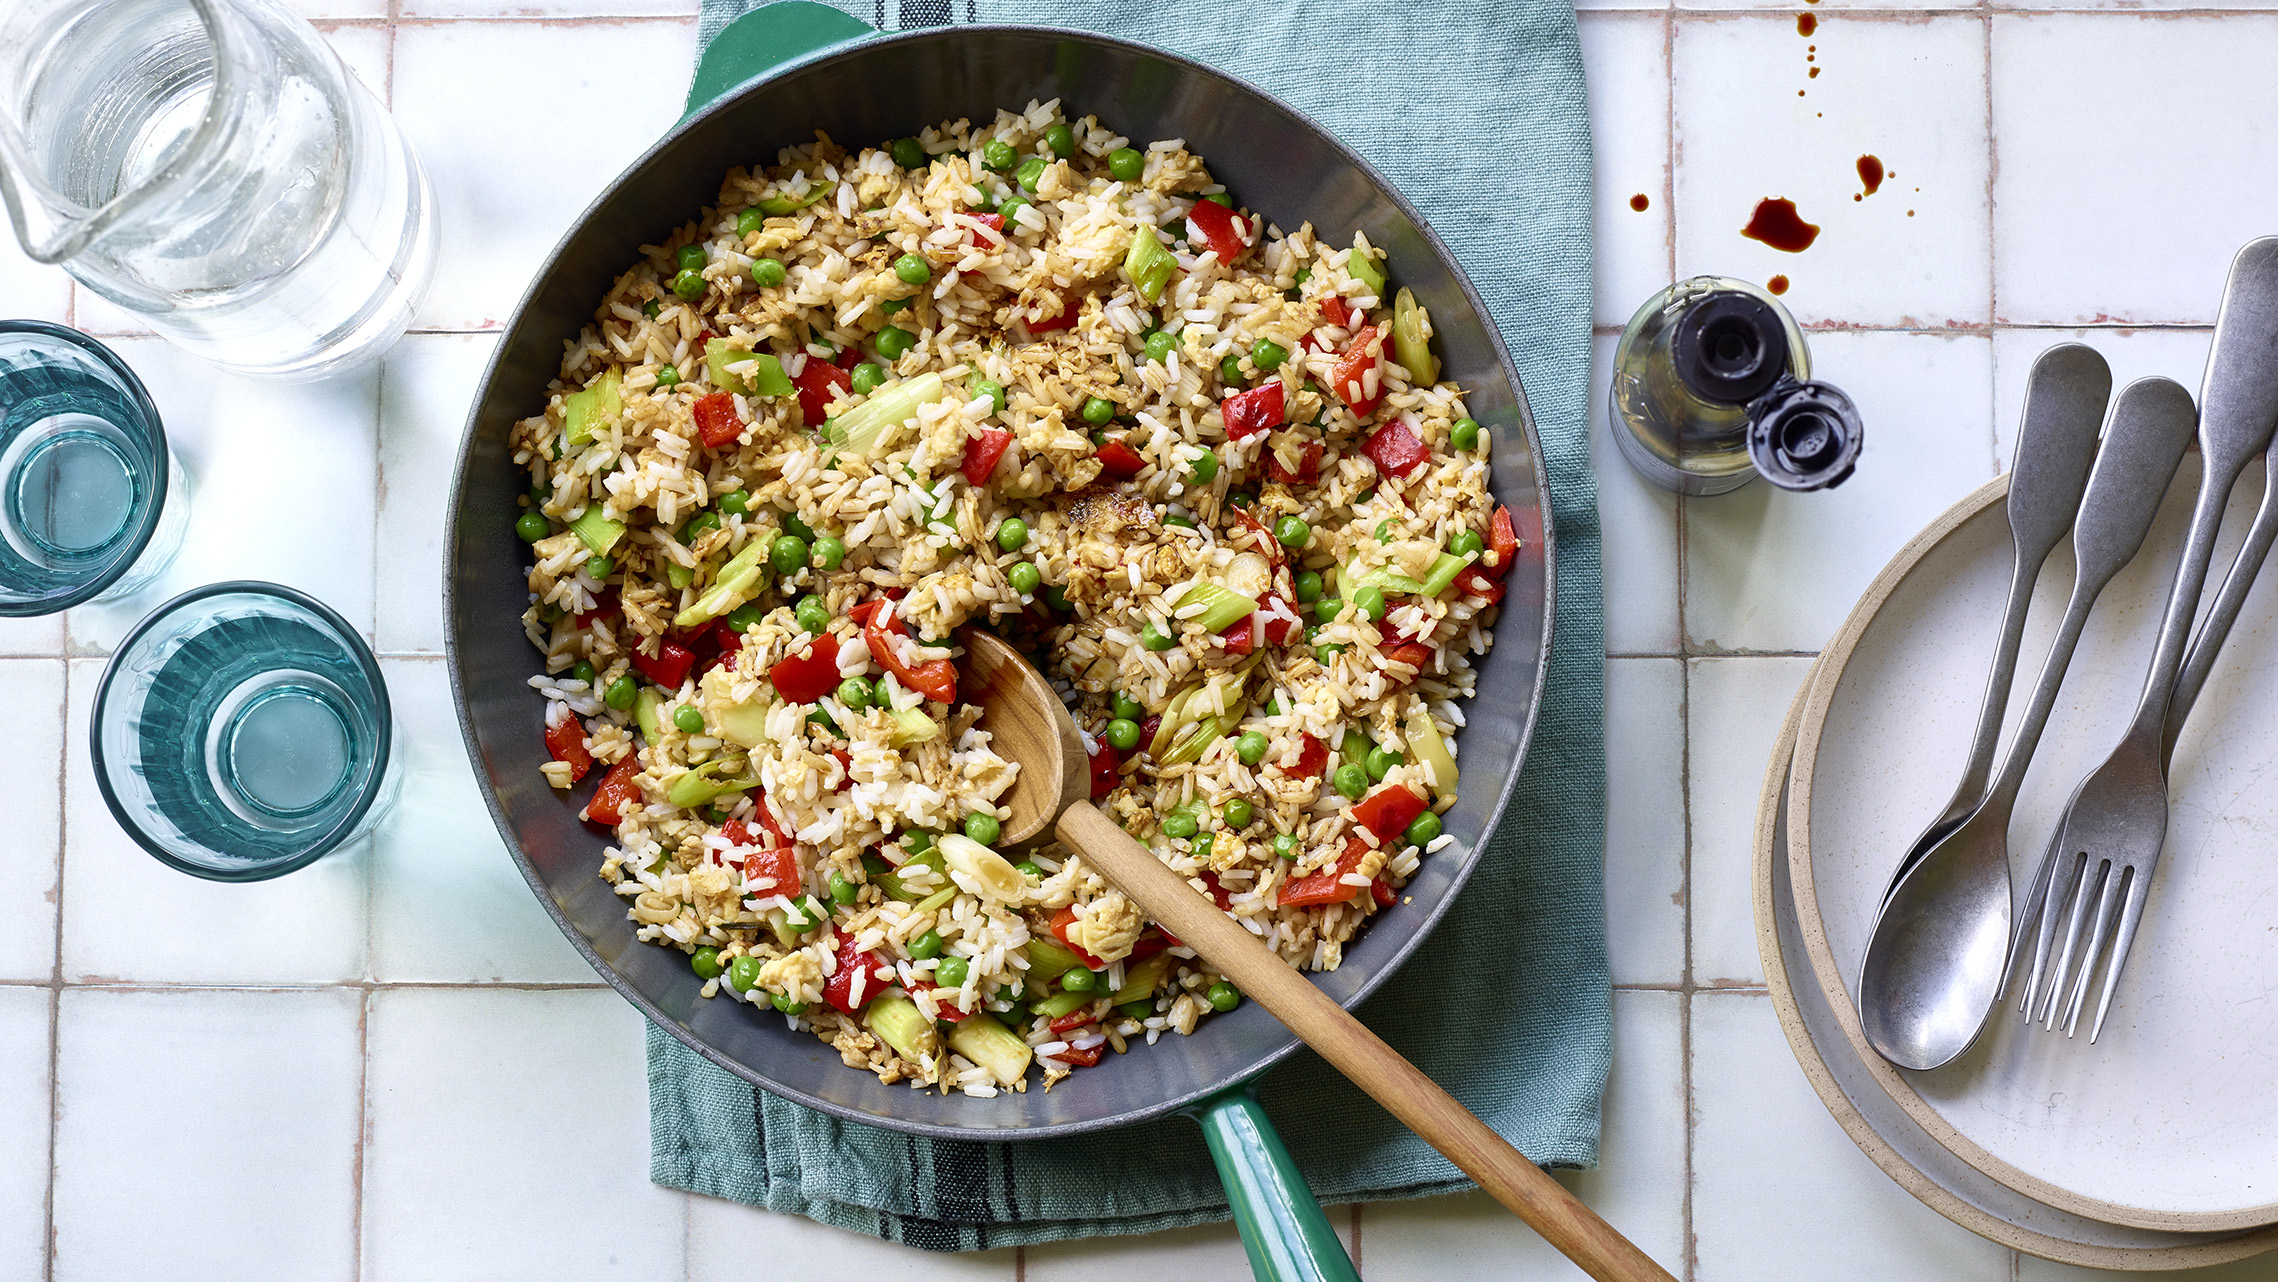 https://food-images.files.bbci.co.uk/food/recipes/budget_egg-fried_rice_93358_16x9.jpg